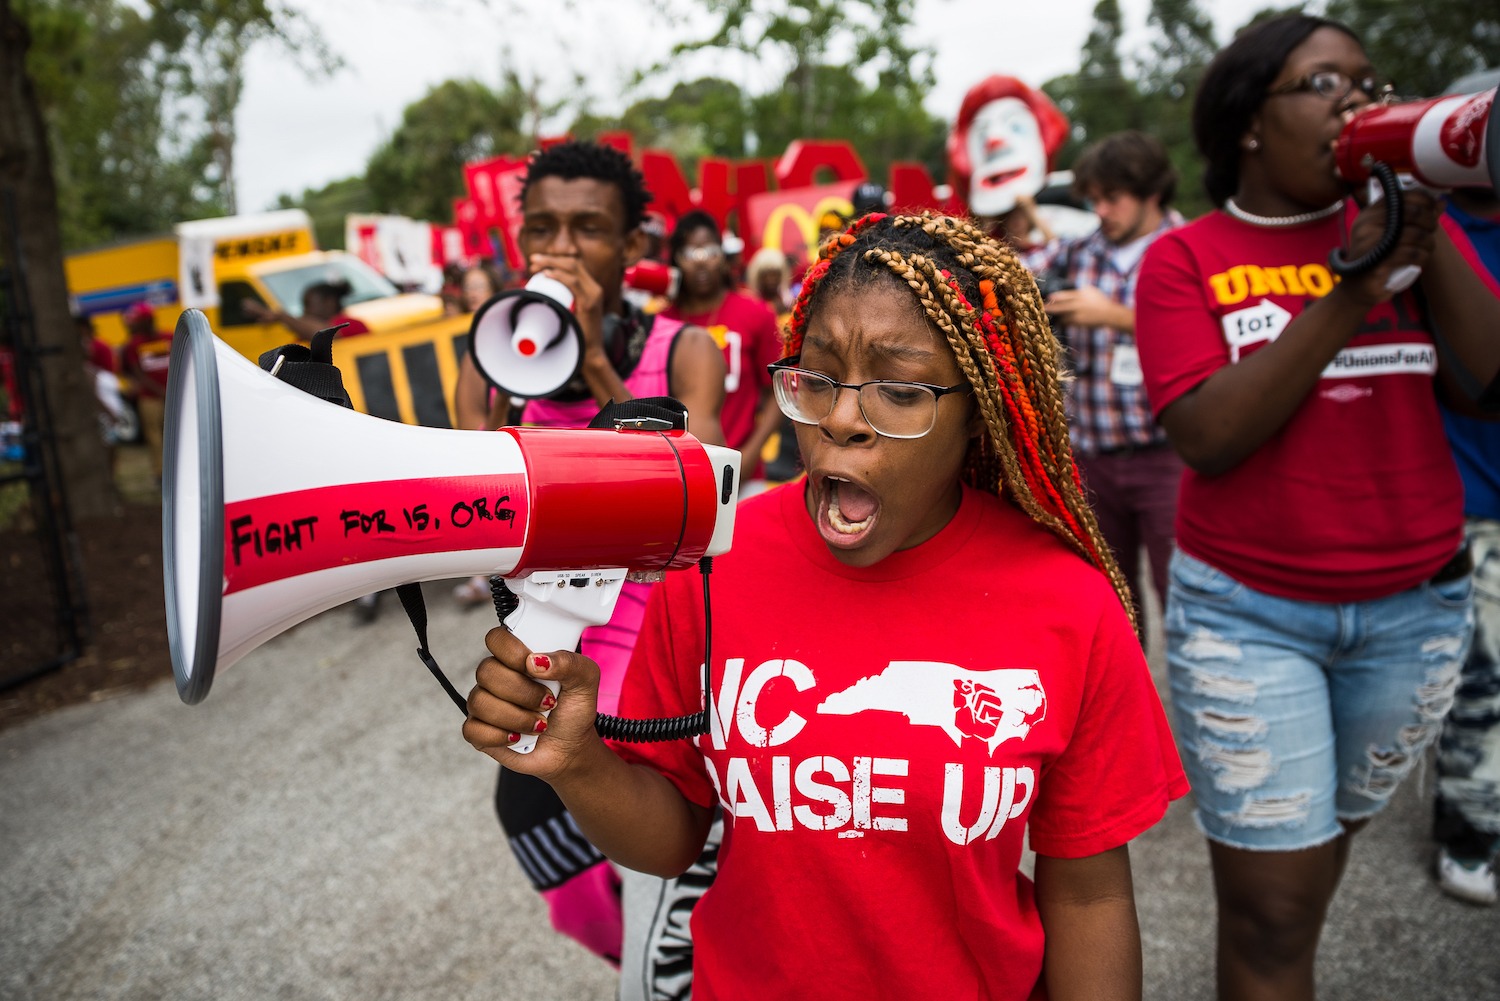 Eshawney Gaston on the megaphone in a fight for $15 protest in North Carolina.